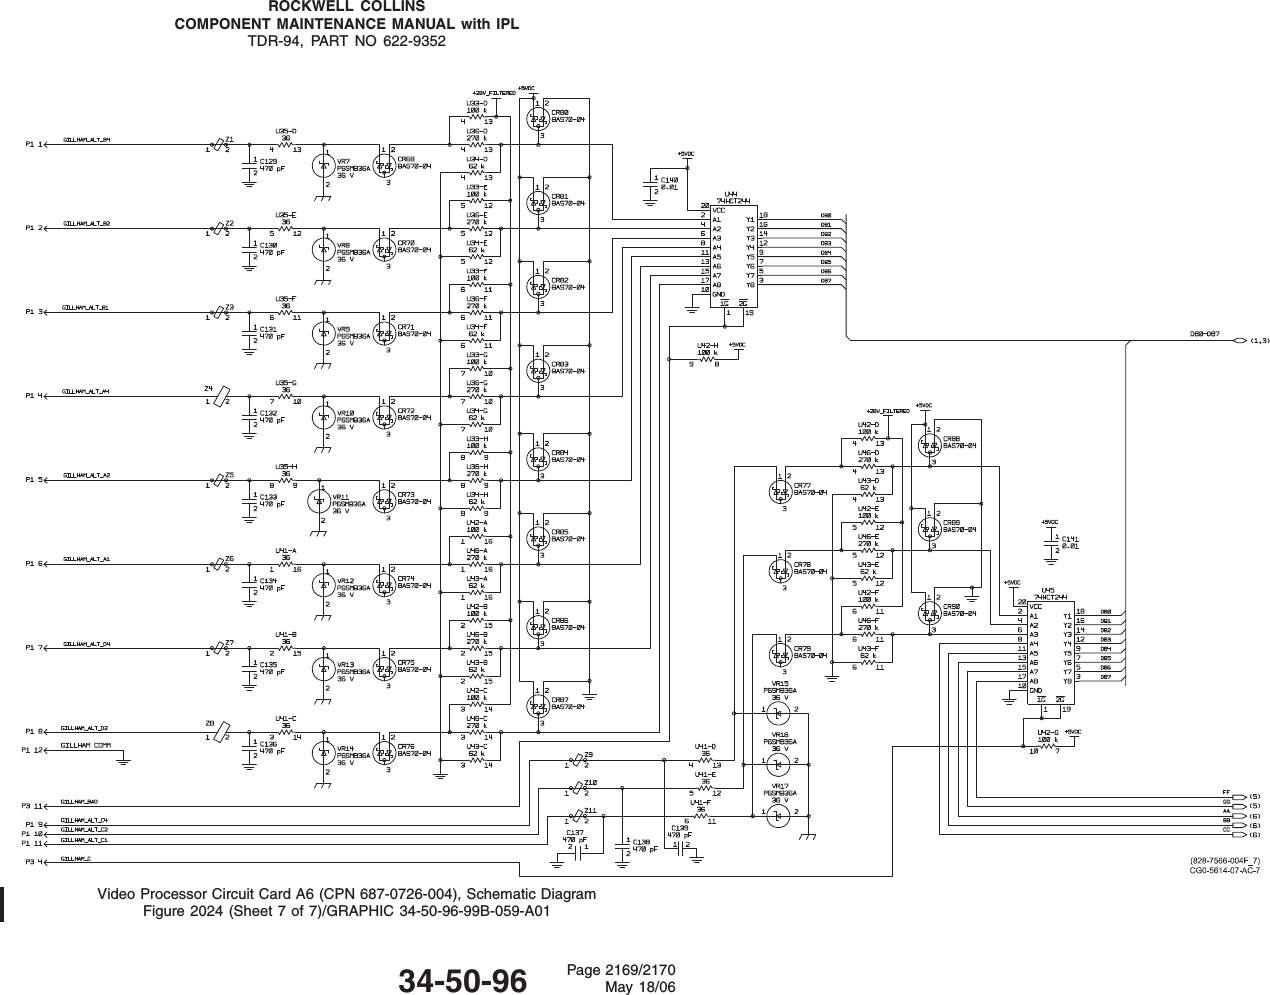 ROCKWELL COLLINSCOMPONENT MAINTENANCE MANUAL with IPLTDR-94, PART NO 622-9352Video Processor Circuit Card A6 (CPN 687-0726-004), Schematic DiagramFigure 2024 (Sheet 7 of 7)/GRAPHIC 34-50-96-99B-059-A0134-50-96 Page 2169/2170May 18/06